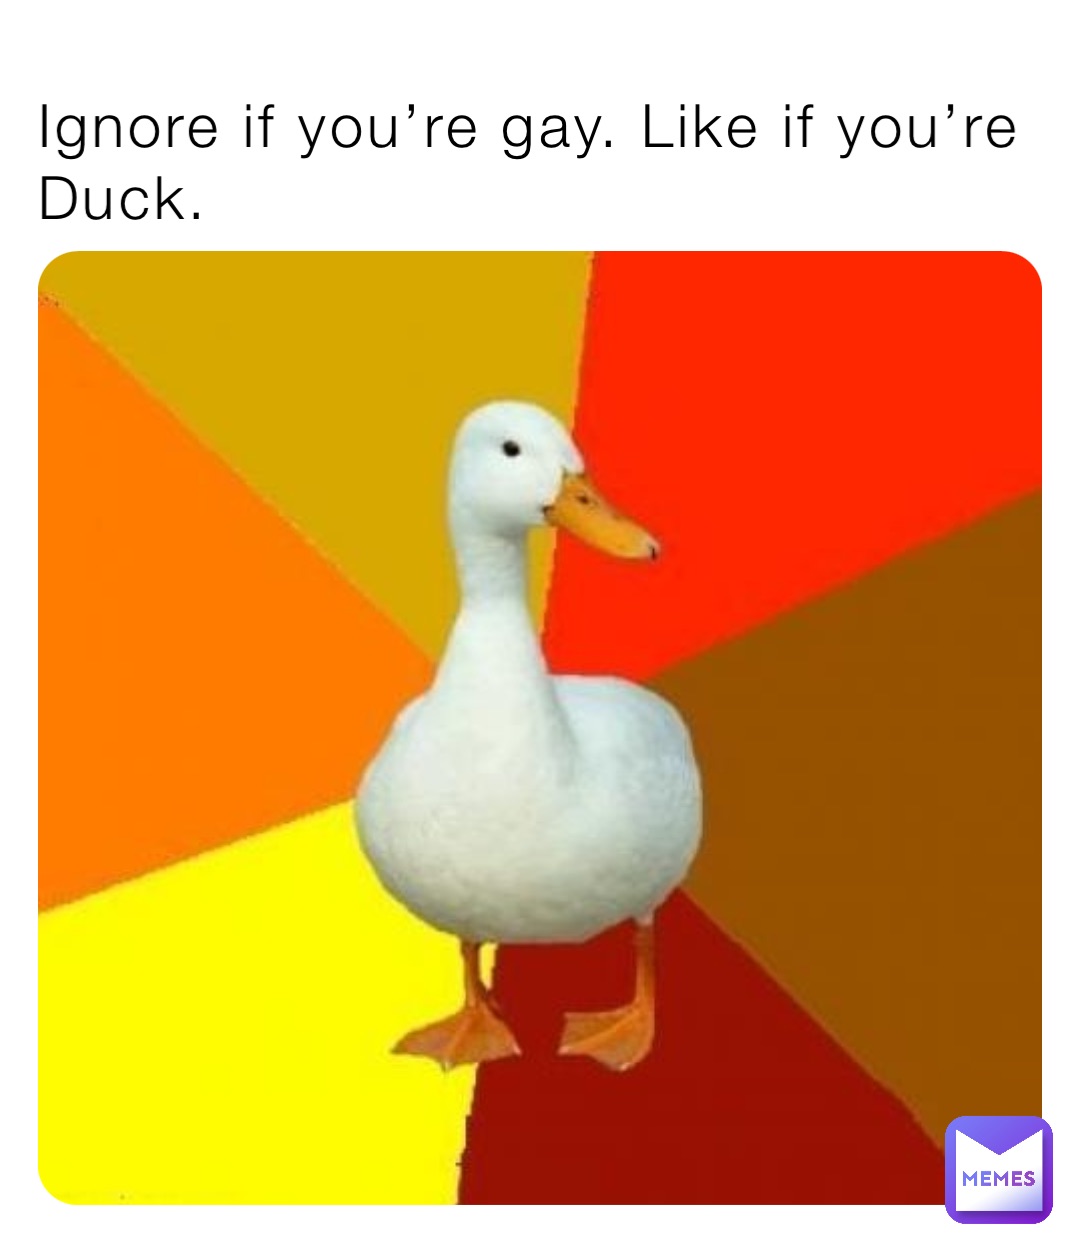 Ignore if you’re gay. Like if you’re Duck.